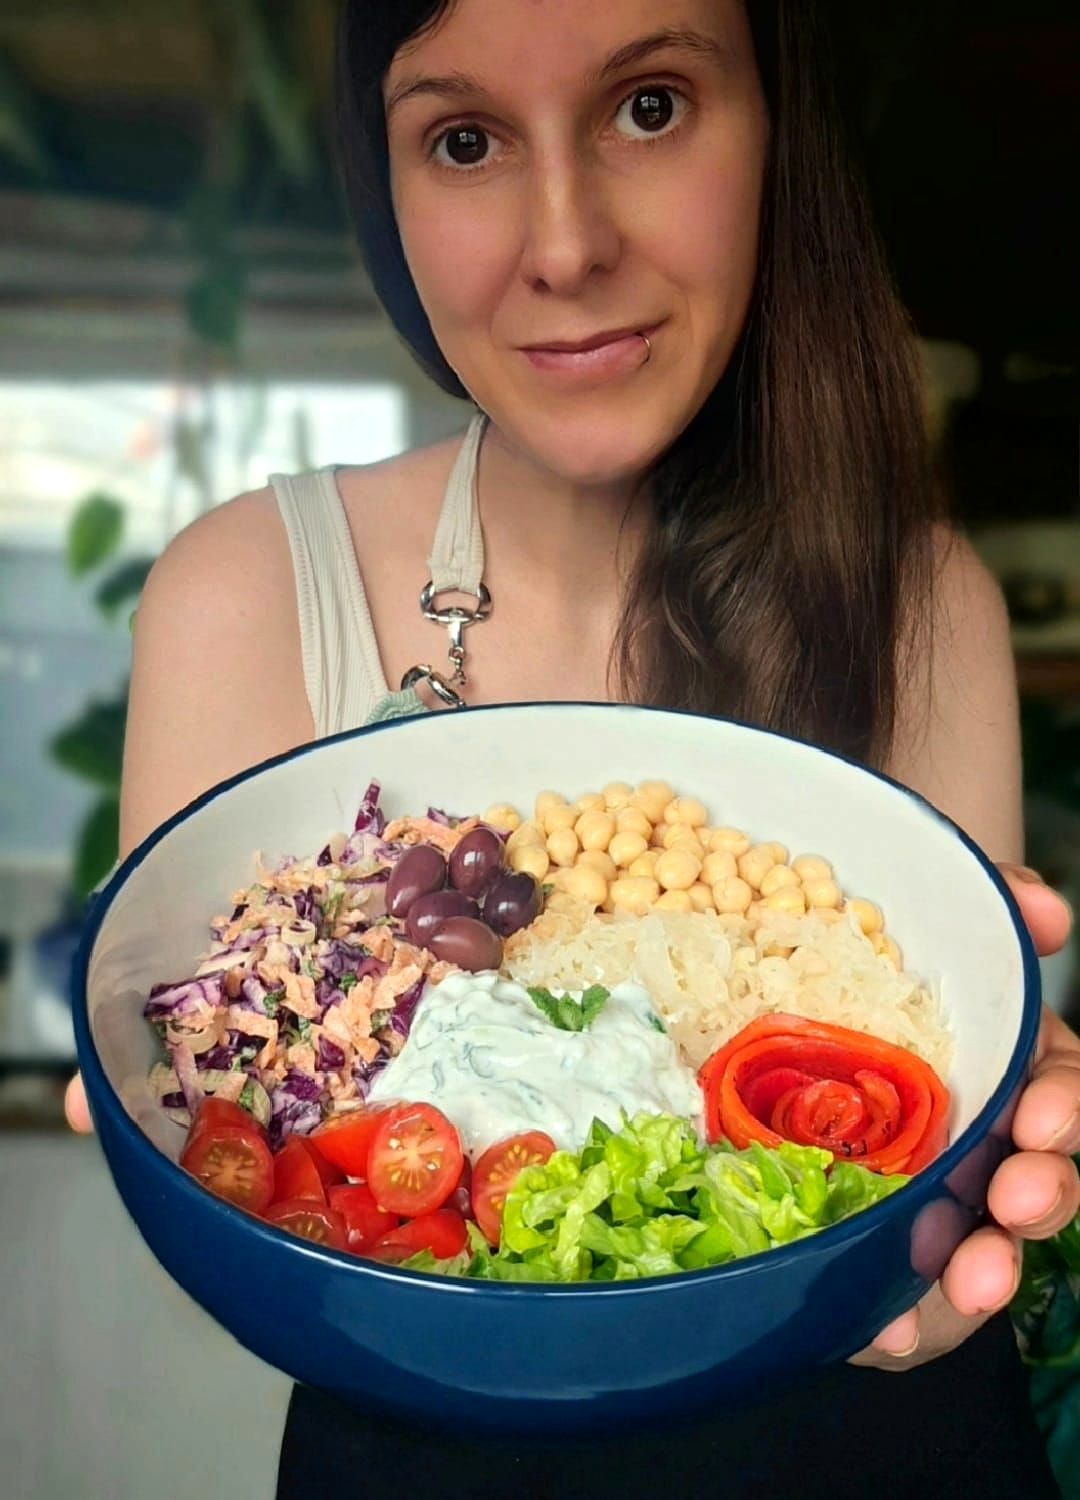 rose with a buddha bowl full of veggies with chickpeas, slaw and tzatziki